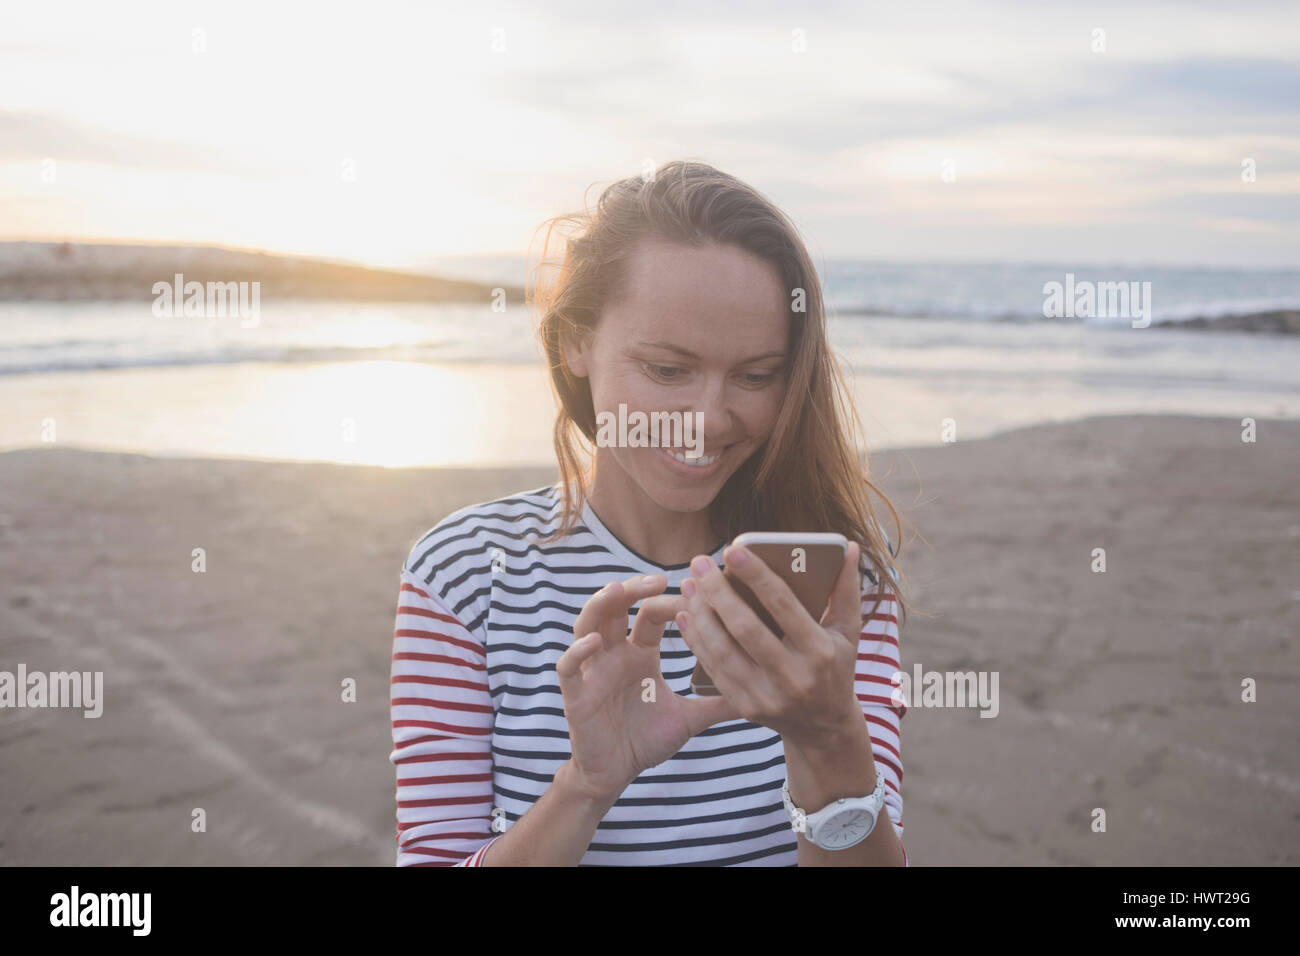 Smiling woman using mobile phone at beach during sunset Stock Photo